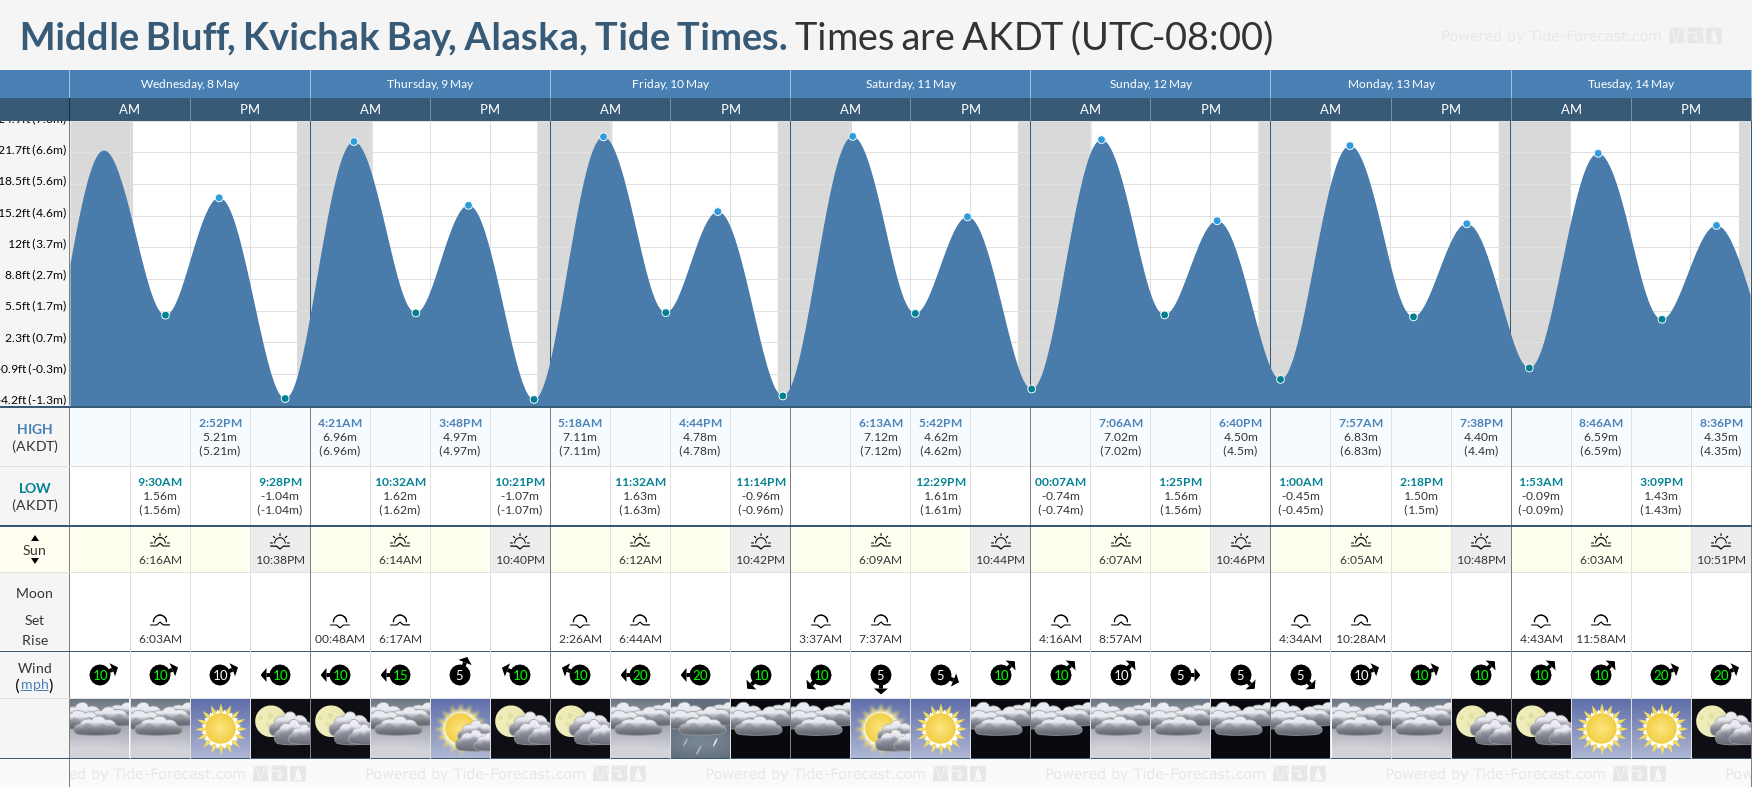 Middle Bluff, Kvichak Bay, Alaska Tide Chart including high and low tide tide times for the next 7 days